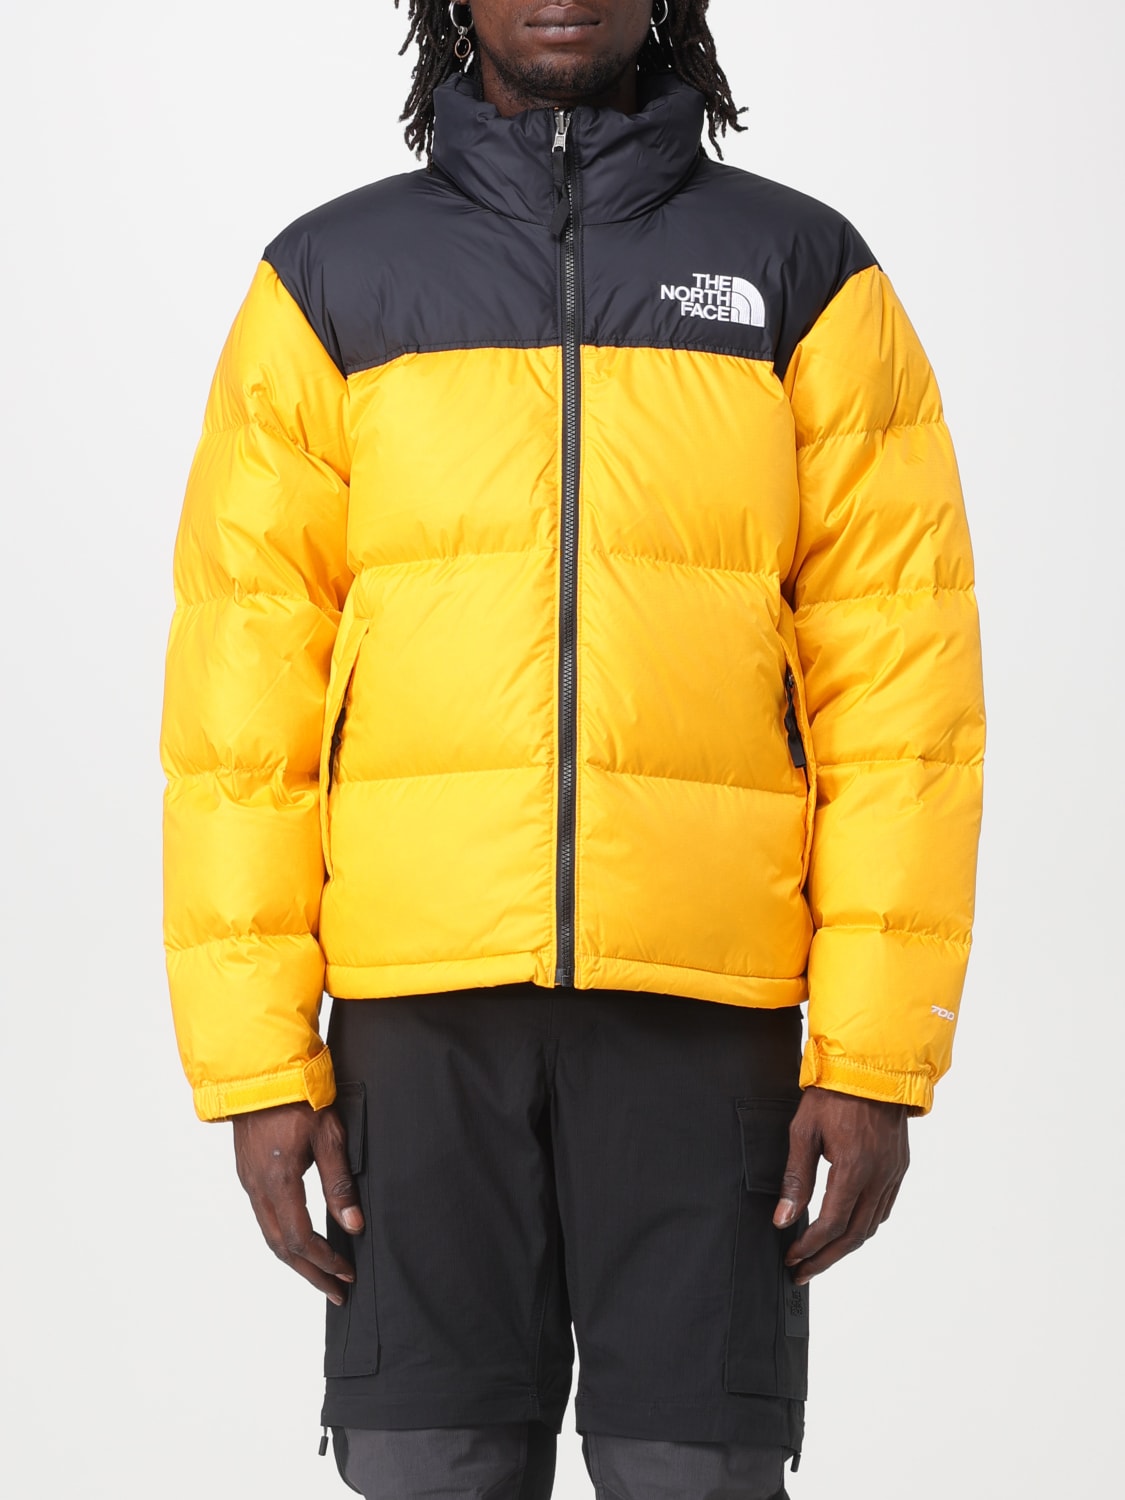 THE NORTH FACE: jacket for man - Gold | The North Face jacket NF0A3C8D ...